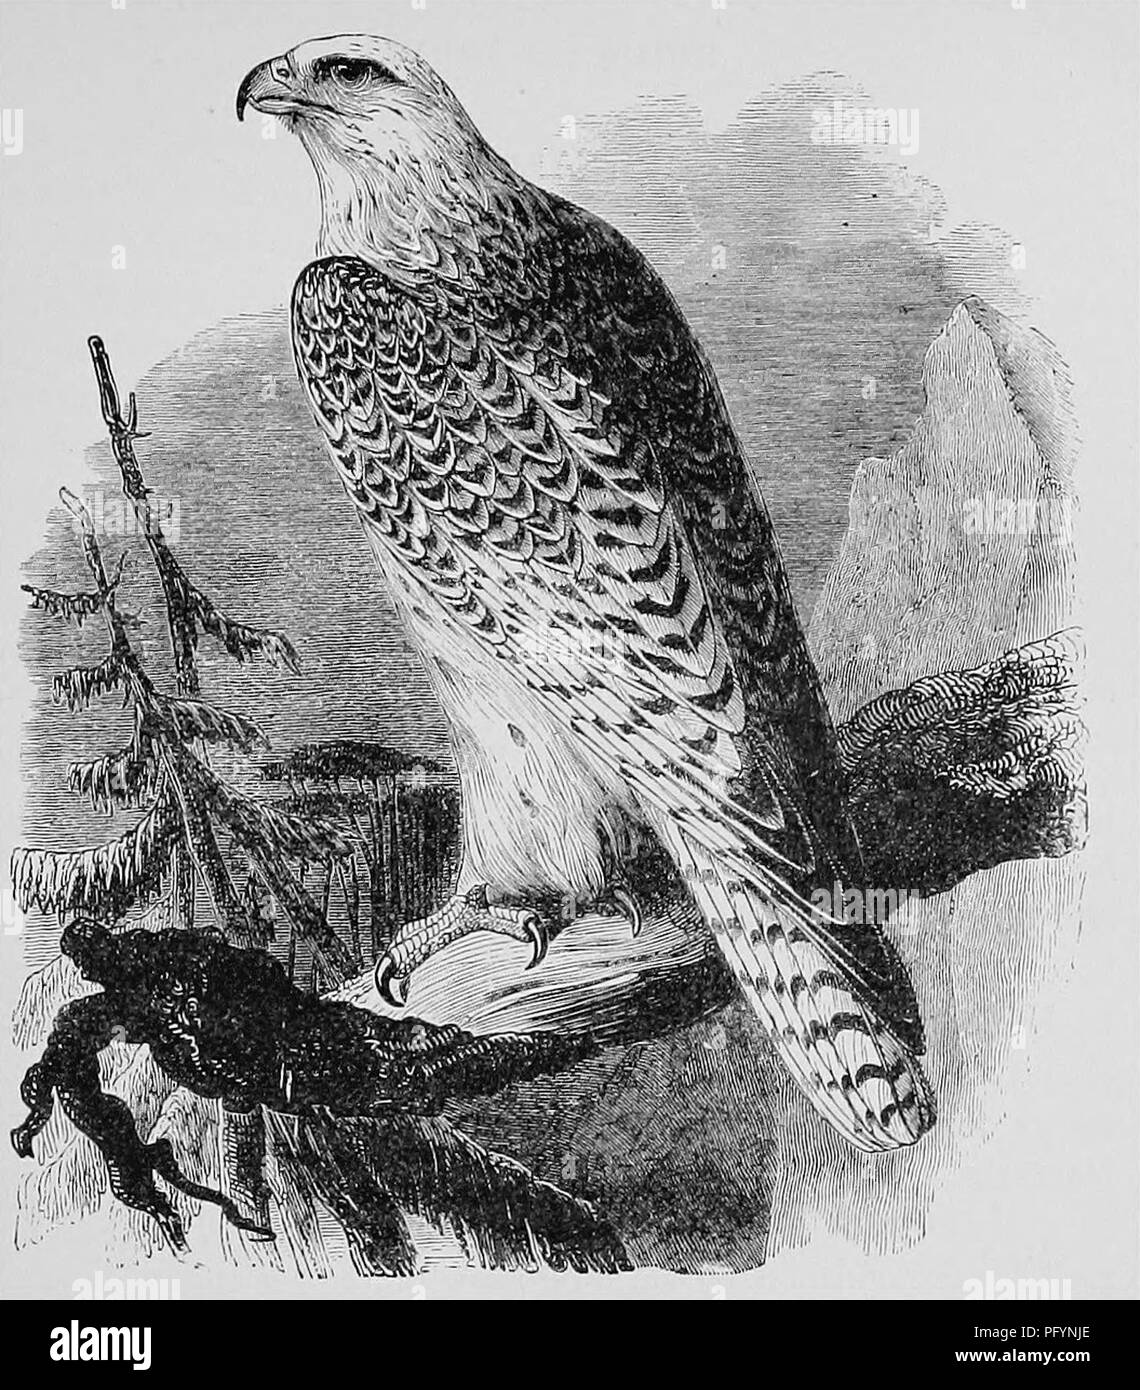 . A popular handbook of the ornithology of the United States and Canada, based on Nuttall's Manual. Birds; Birds. WHITE GYRFALCON. Falco islandus. Char. Prevailing color white, often immaculate, but usually with dark markings. Legs partially feathered. A sharp tooth near point of upper mandible ; the end of under mandible notched. Length 2i to 24 inches. Nest. Usually on a cliff; roughly made of sticks, — large dry twigs. Eggs. 3-4; buff or brownish, marked with reddish brown; 2.25 X 1.25. GRAY GYRFALCON. Falco rusticolus. Char. Prevailing color dull gray, with whitish and slaty-blue bands and Stock Photo